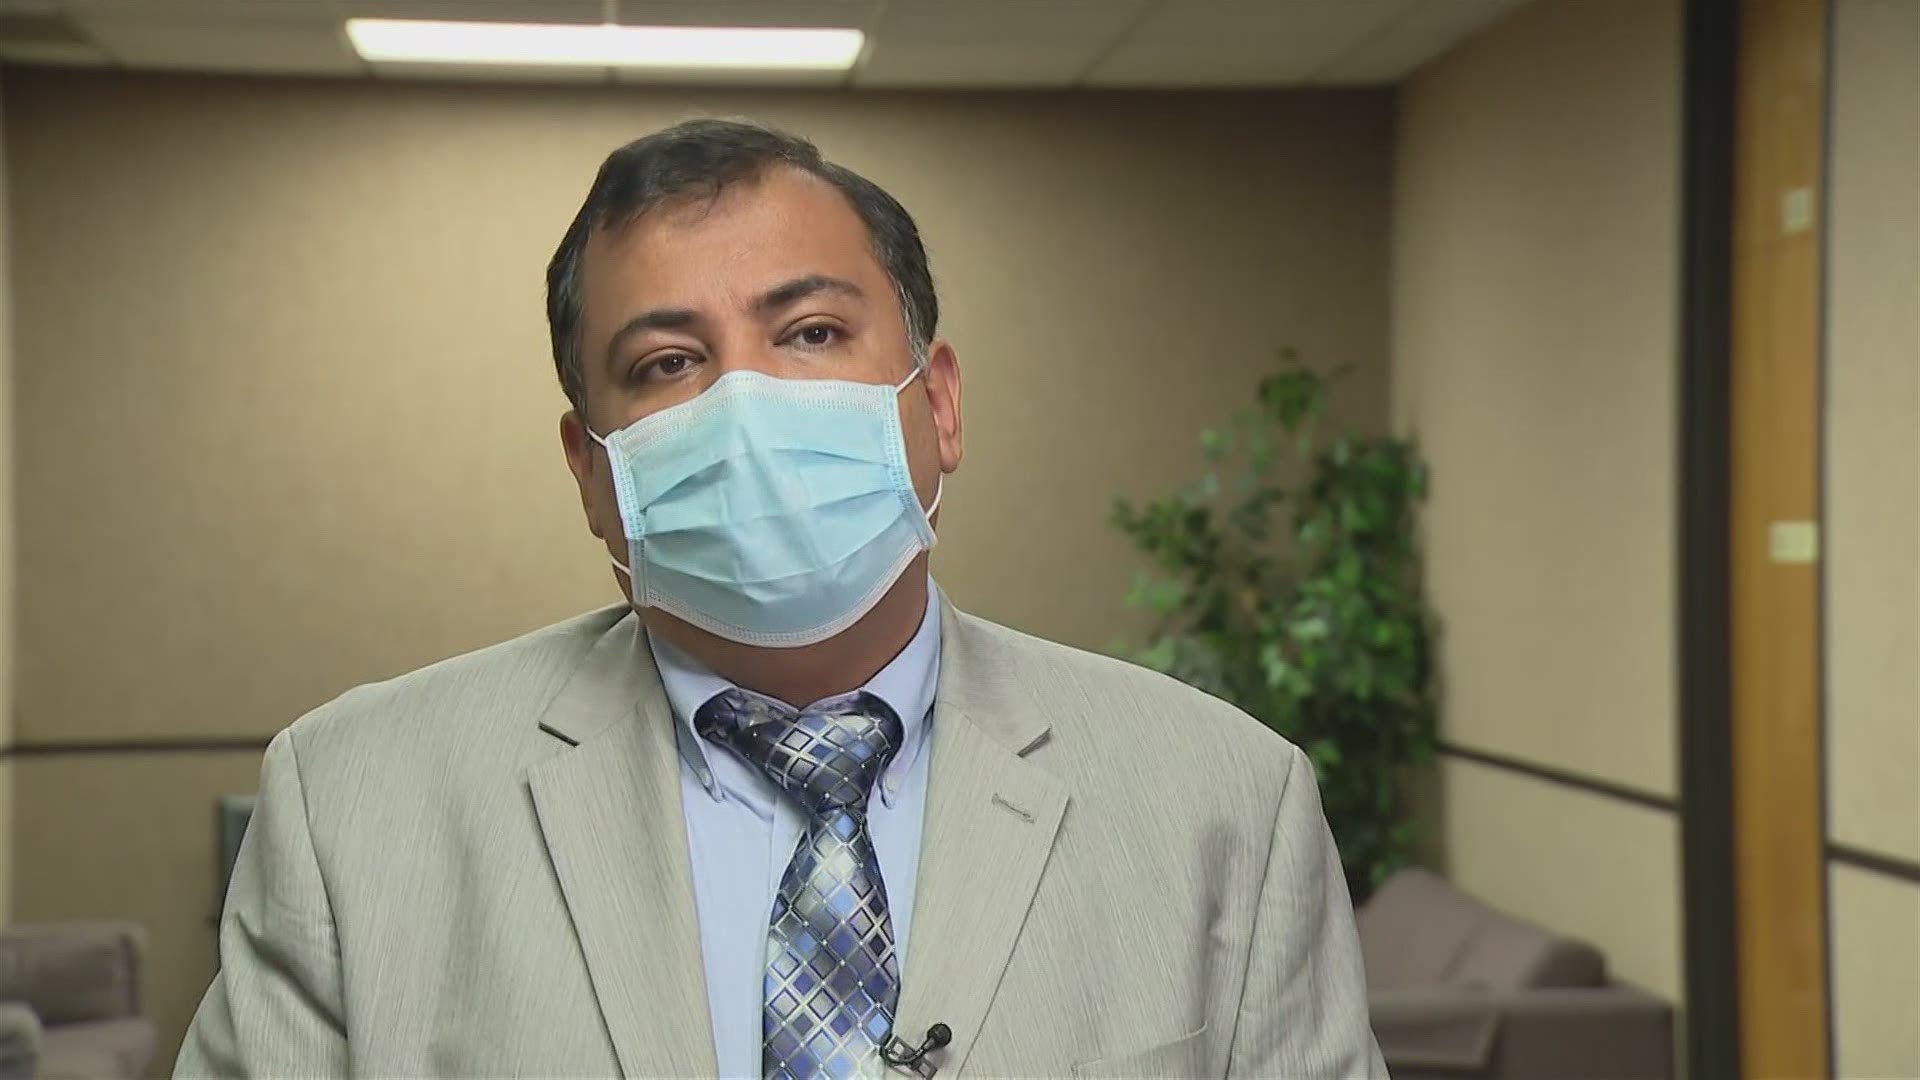 "They're giving us the guidance. Let's follow it," said Tarrant County Public Health Directory Vinny Taneja.